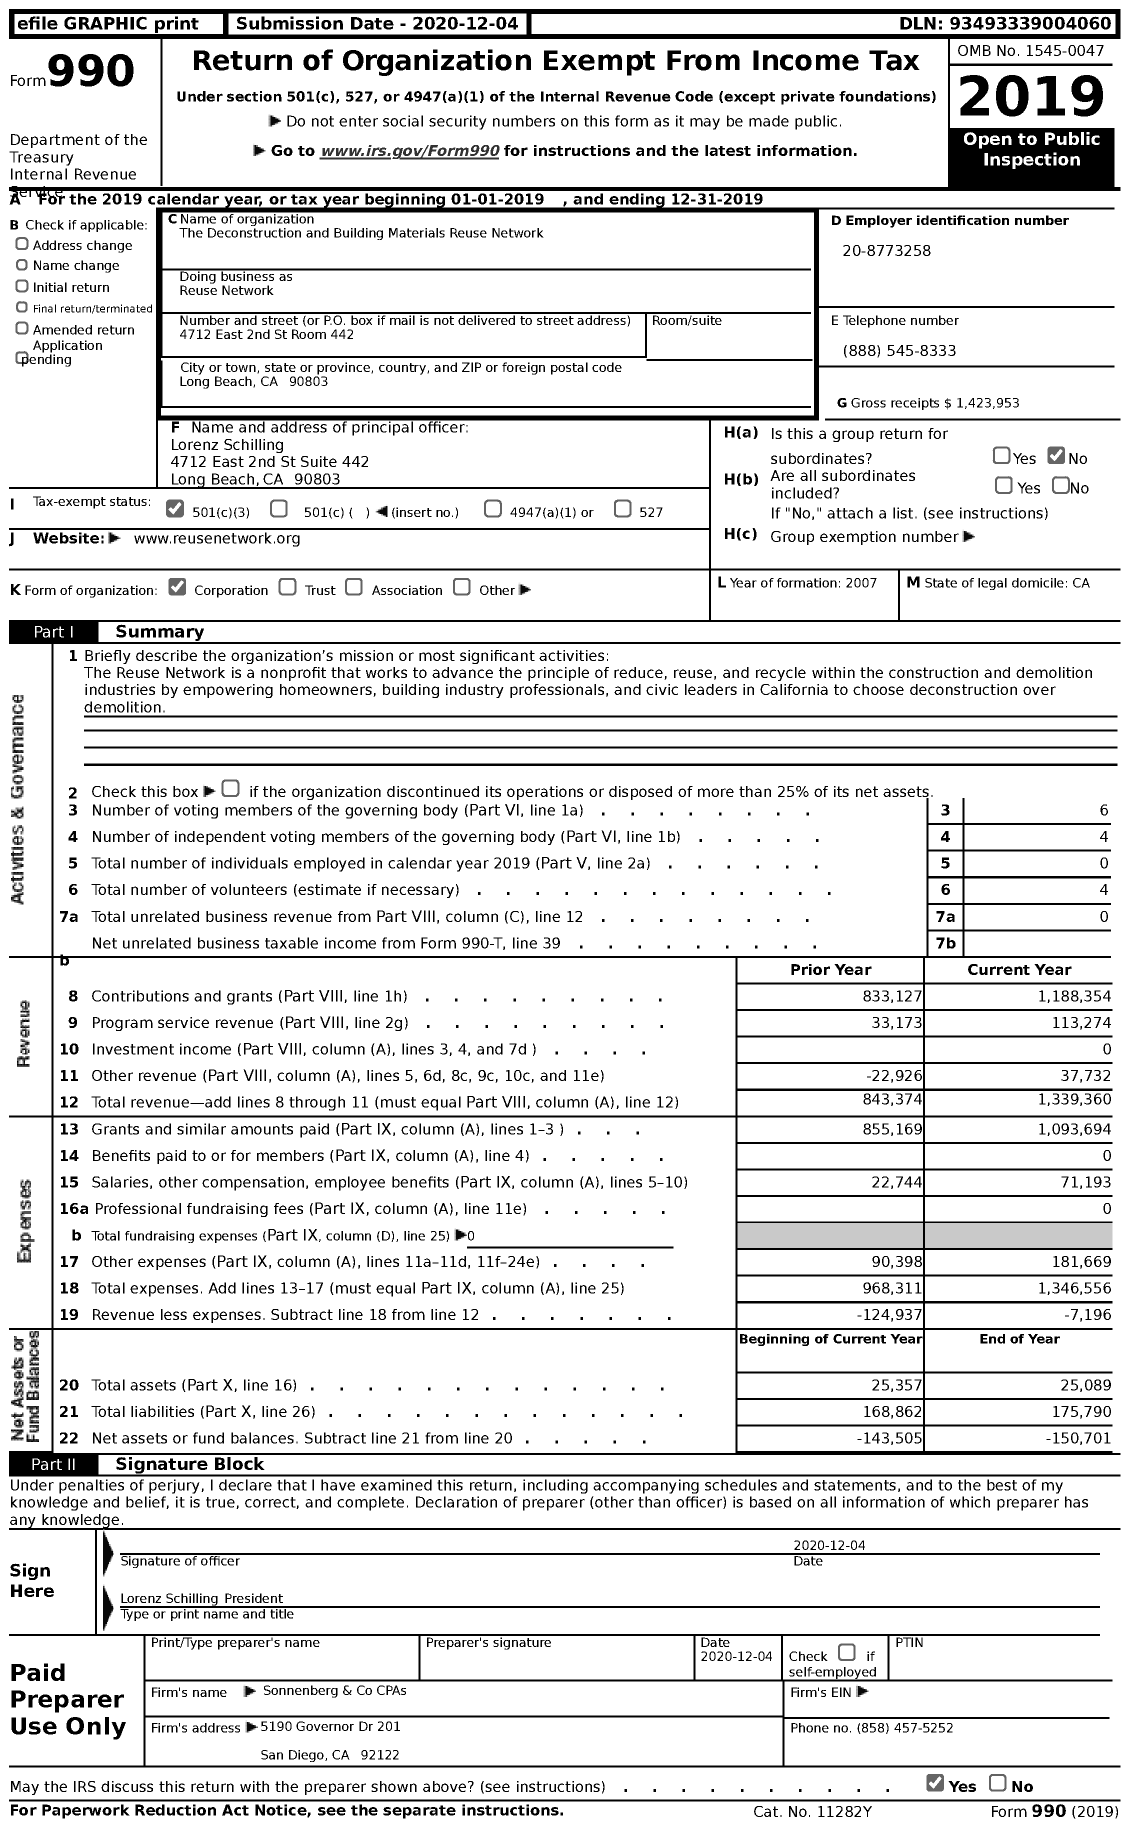 Image of first page of 2019 Form 990 for The Deconstruction and Building Materials Reuse Network (DRN)